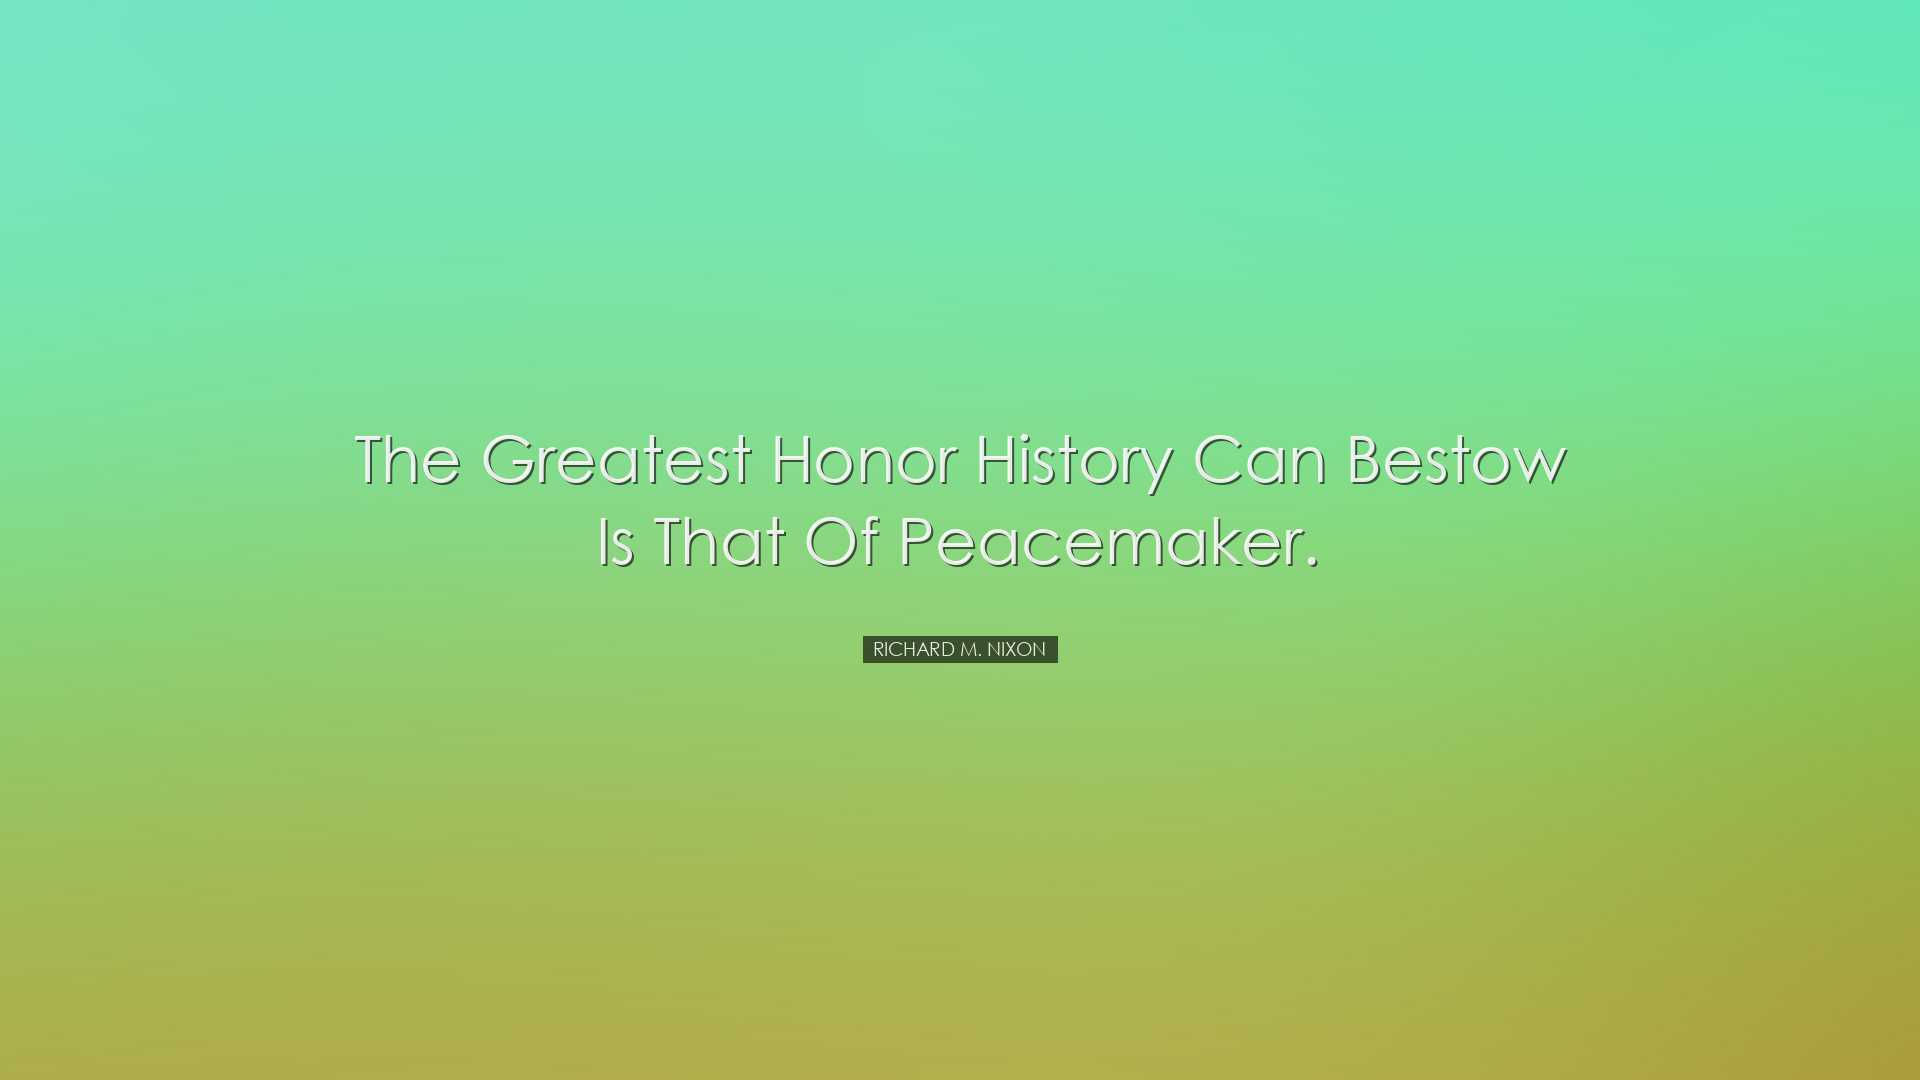 The greatest honor history can bestow is that of peacemaker. - Ric